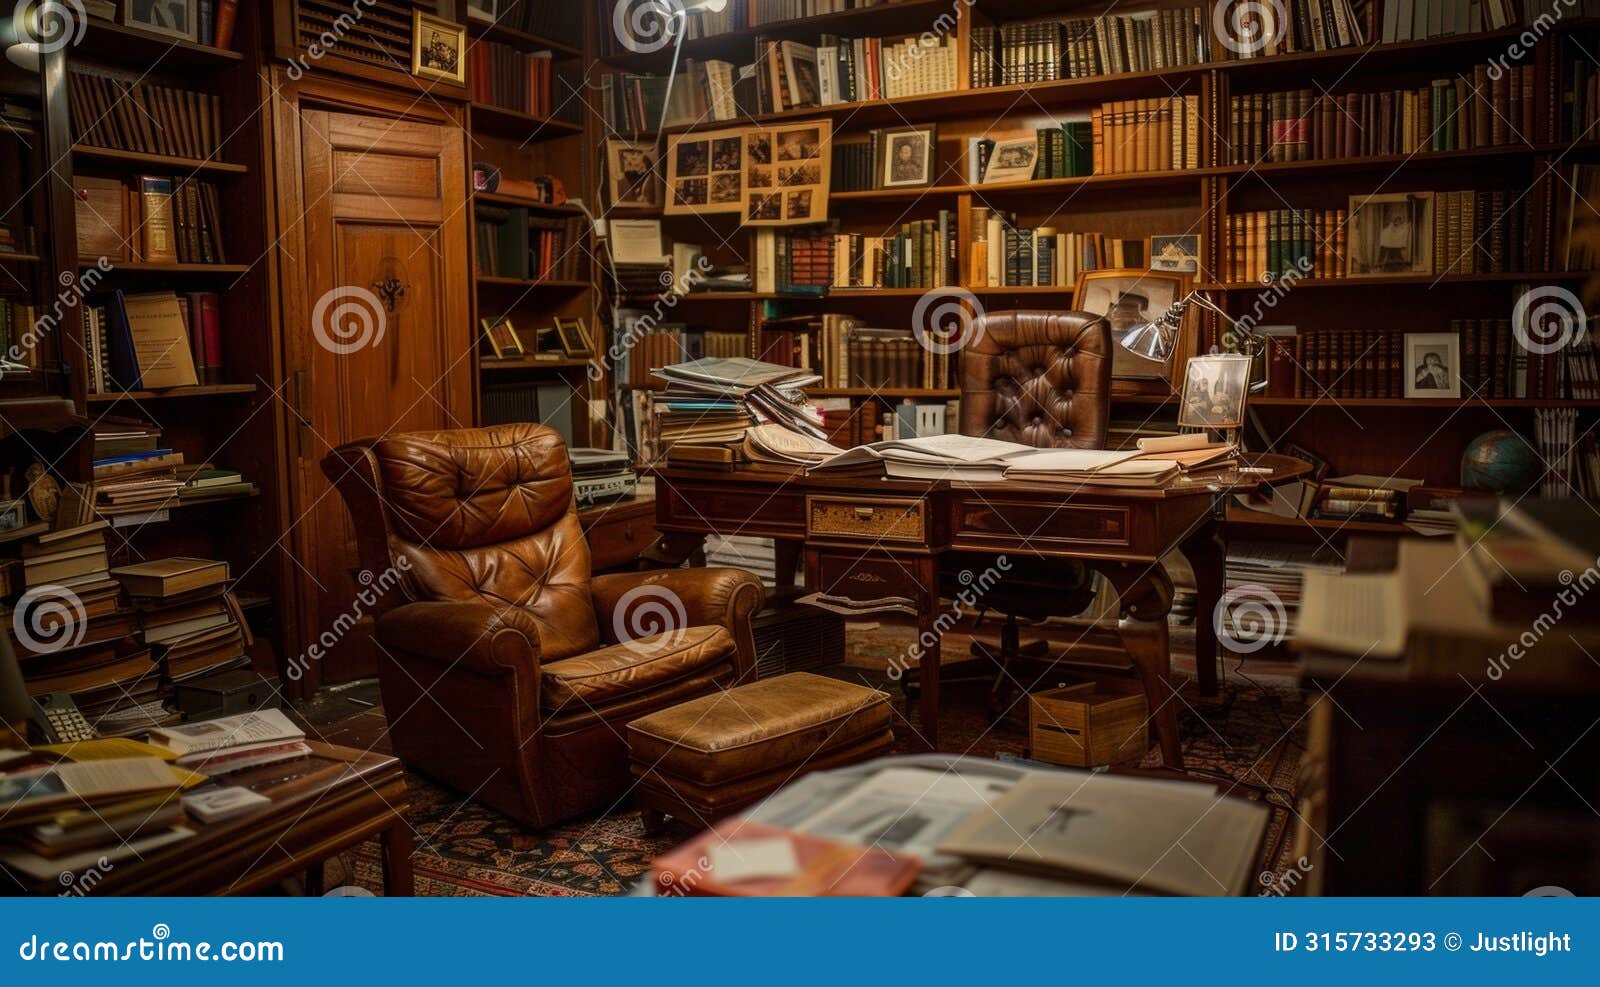 a dimlylit room with a leather armchair a bookshelf filled with journals and memoirs and a desk covered with letters and